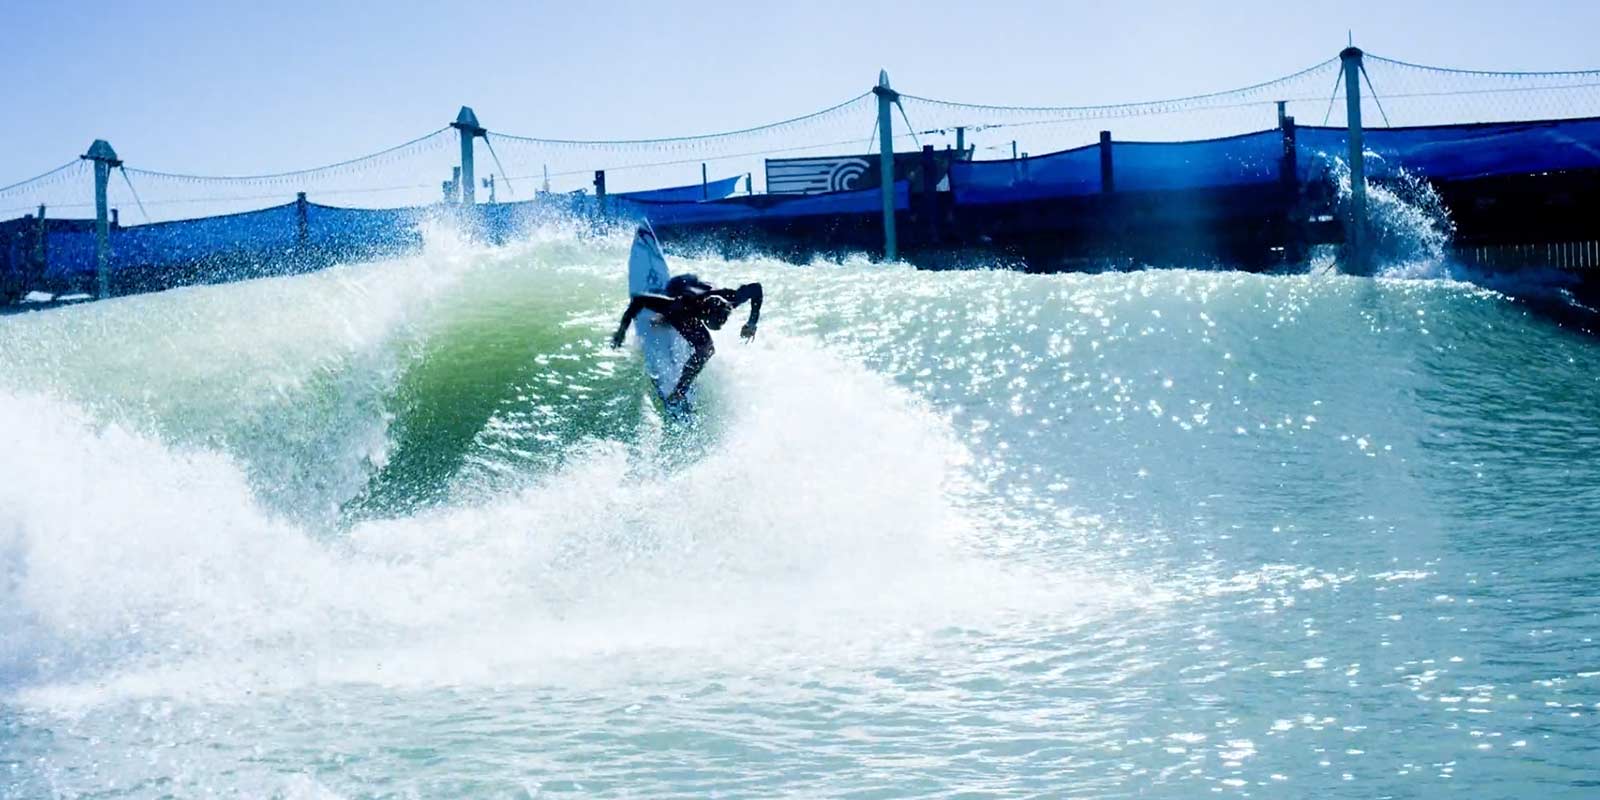 The Inaugural WSL Surf Ranch Pro Kelly Slater's Wave Pool Championship Event